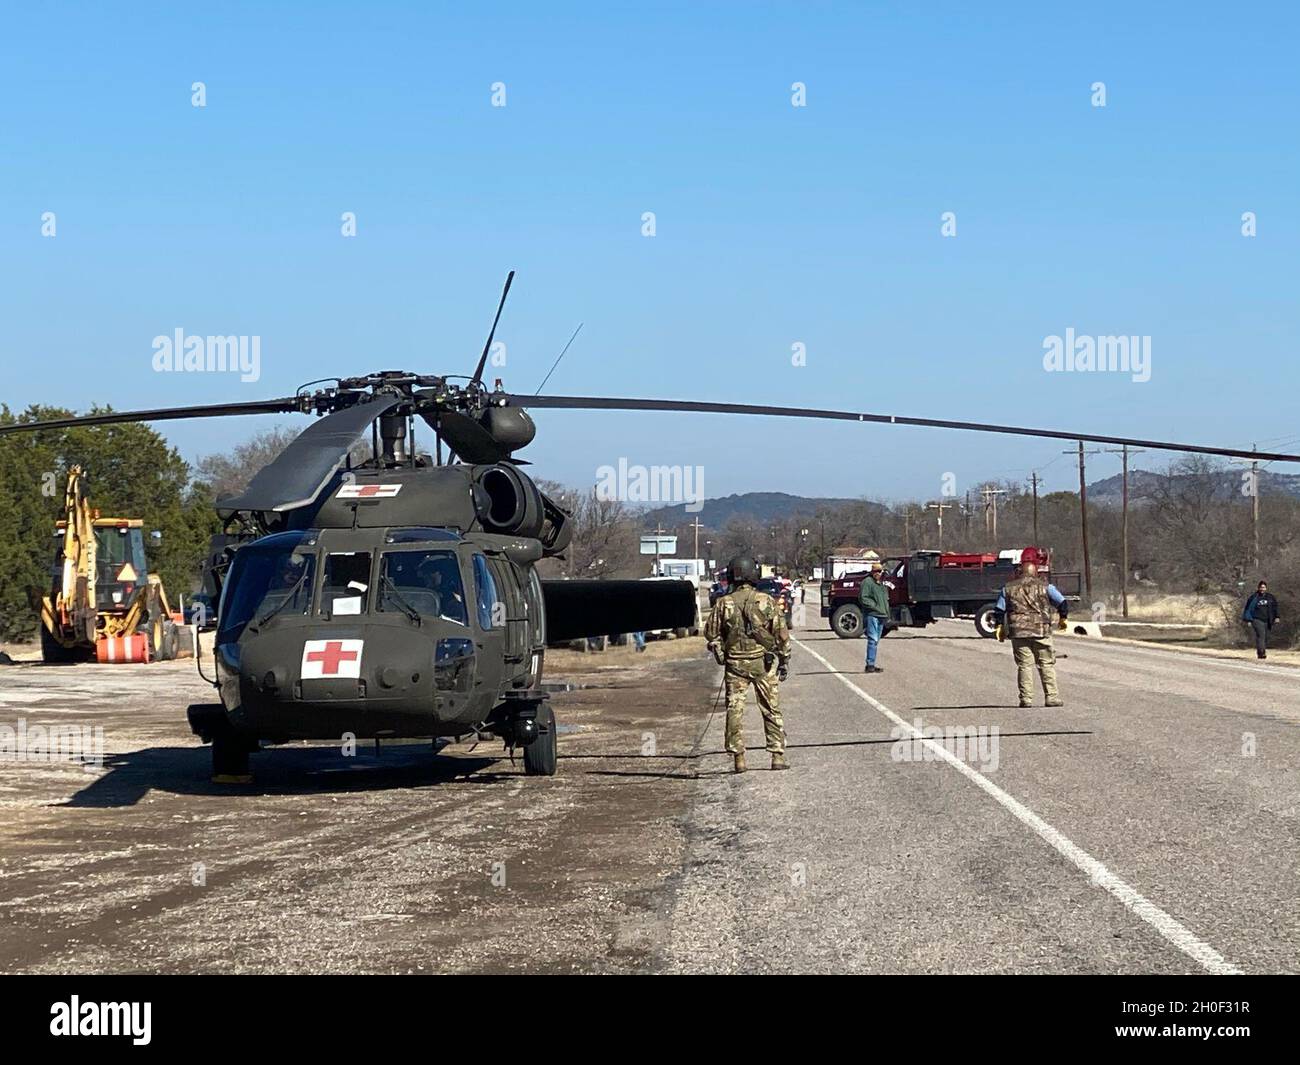 Soldiers of Charlie Company, 2-149th General Aviation Support Battalion, Texas Army National Guard deliver food and water in response to Winter Storm Uri Feb 20. 2021, at Camp Wood, Texas. Stock Photo